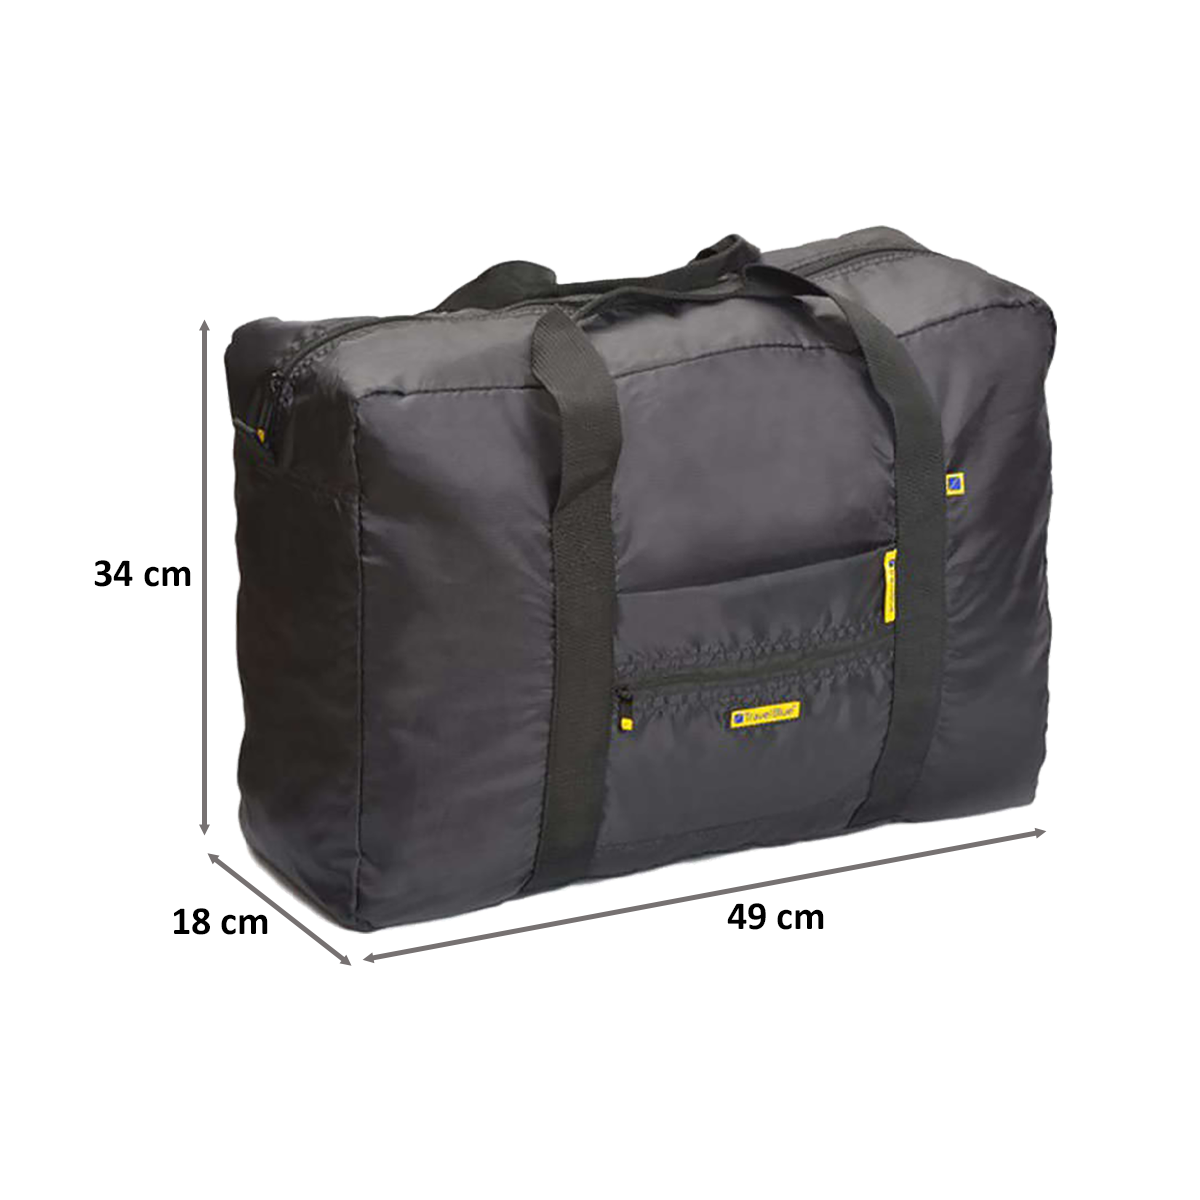 Promotional Shopping Thaila / Carry bag at Best Price in Delhi NCR -  Manufacturer and Supplier